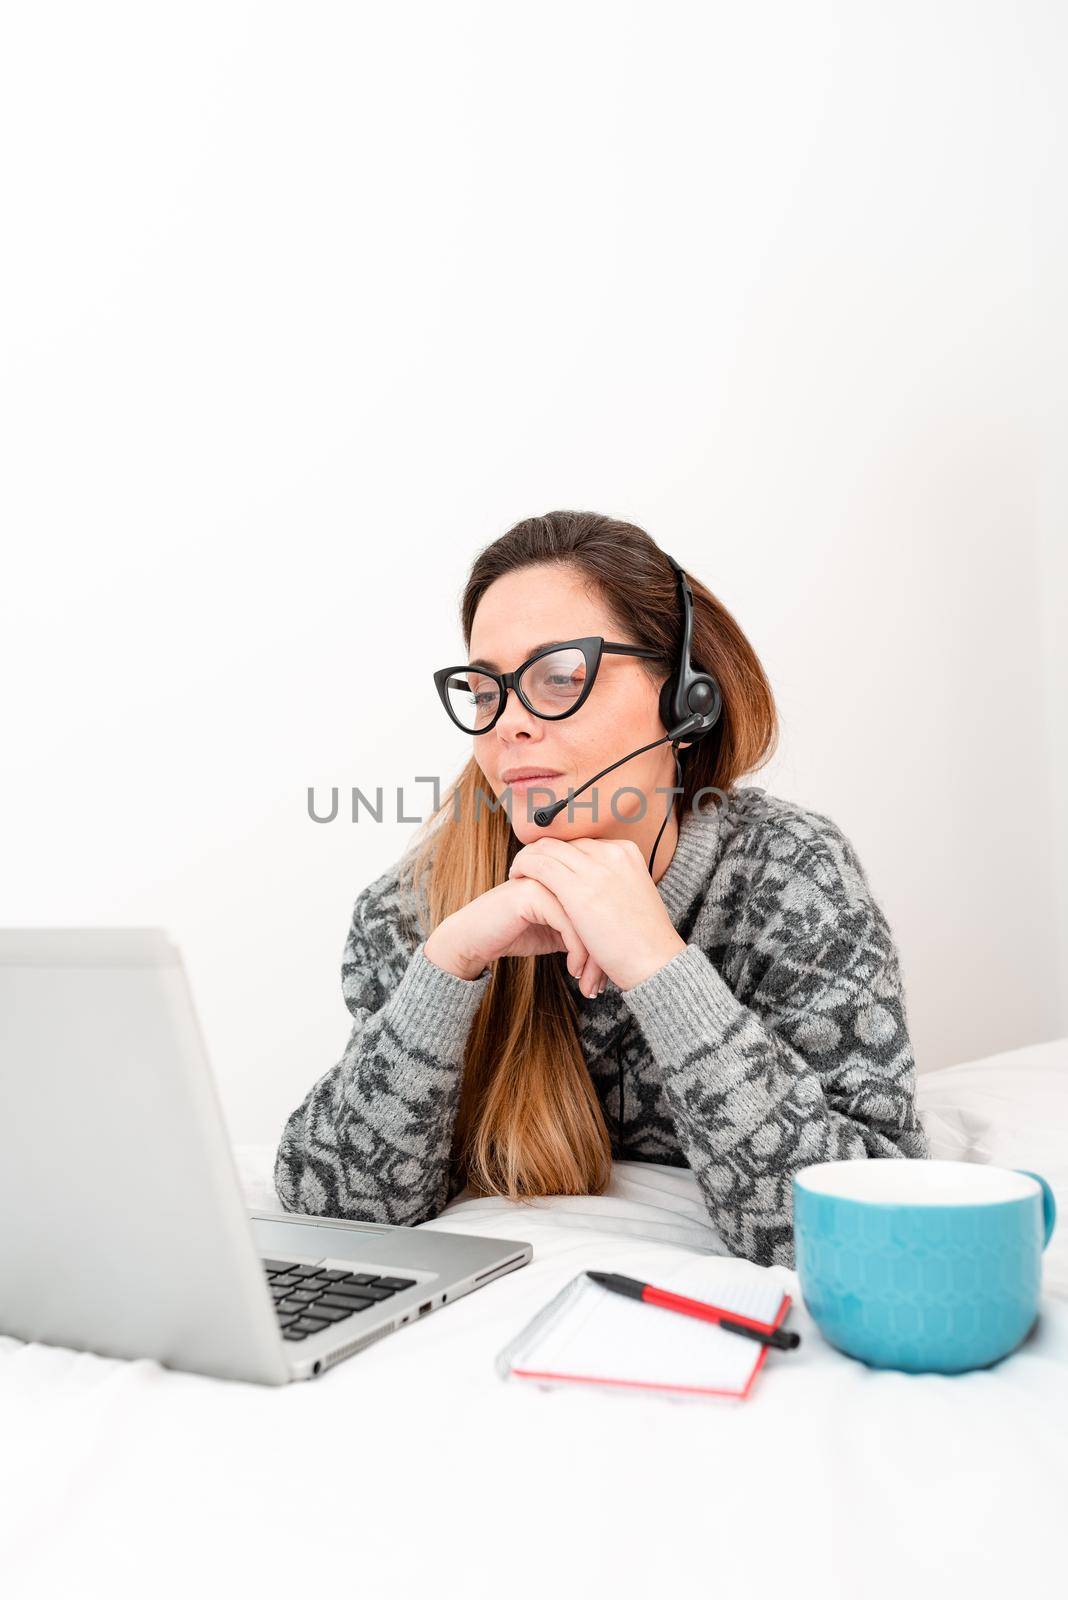 Callcenter Agent Working From Home, Student Preparing For Examinations